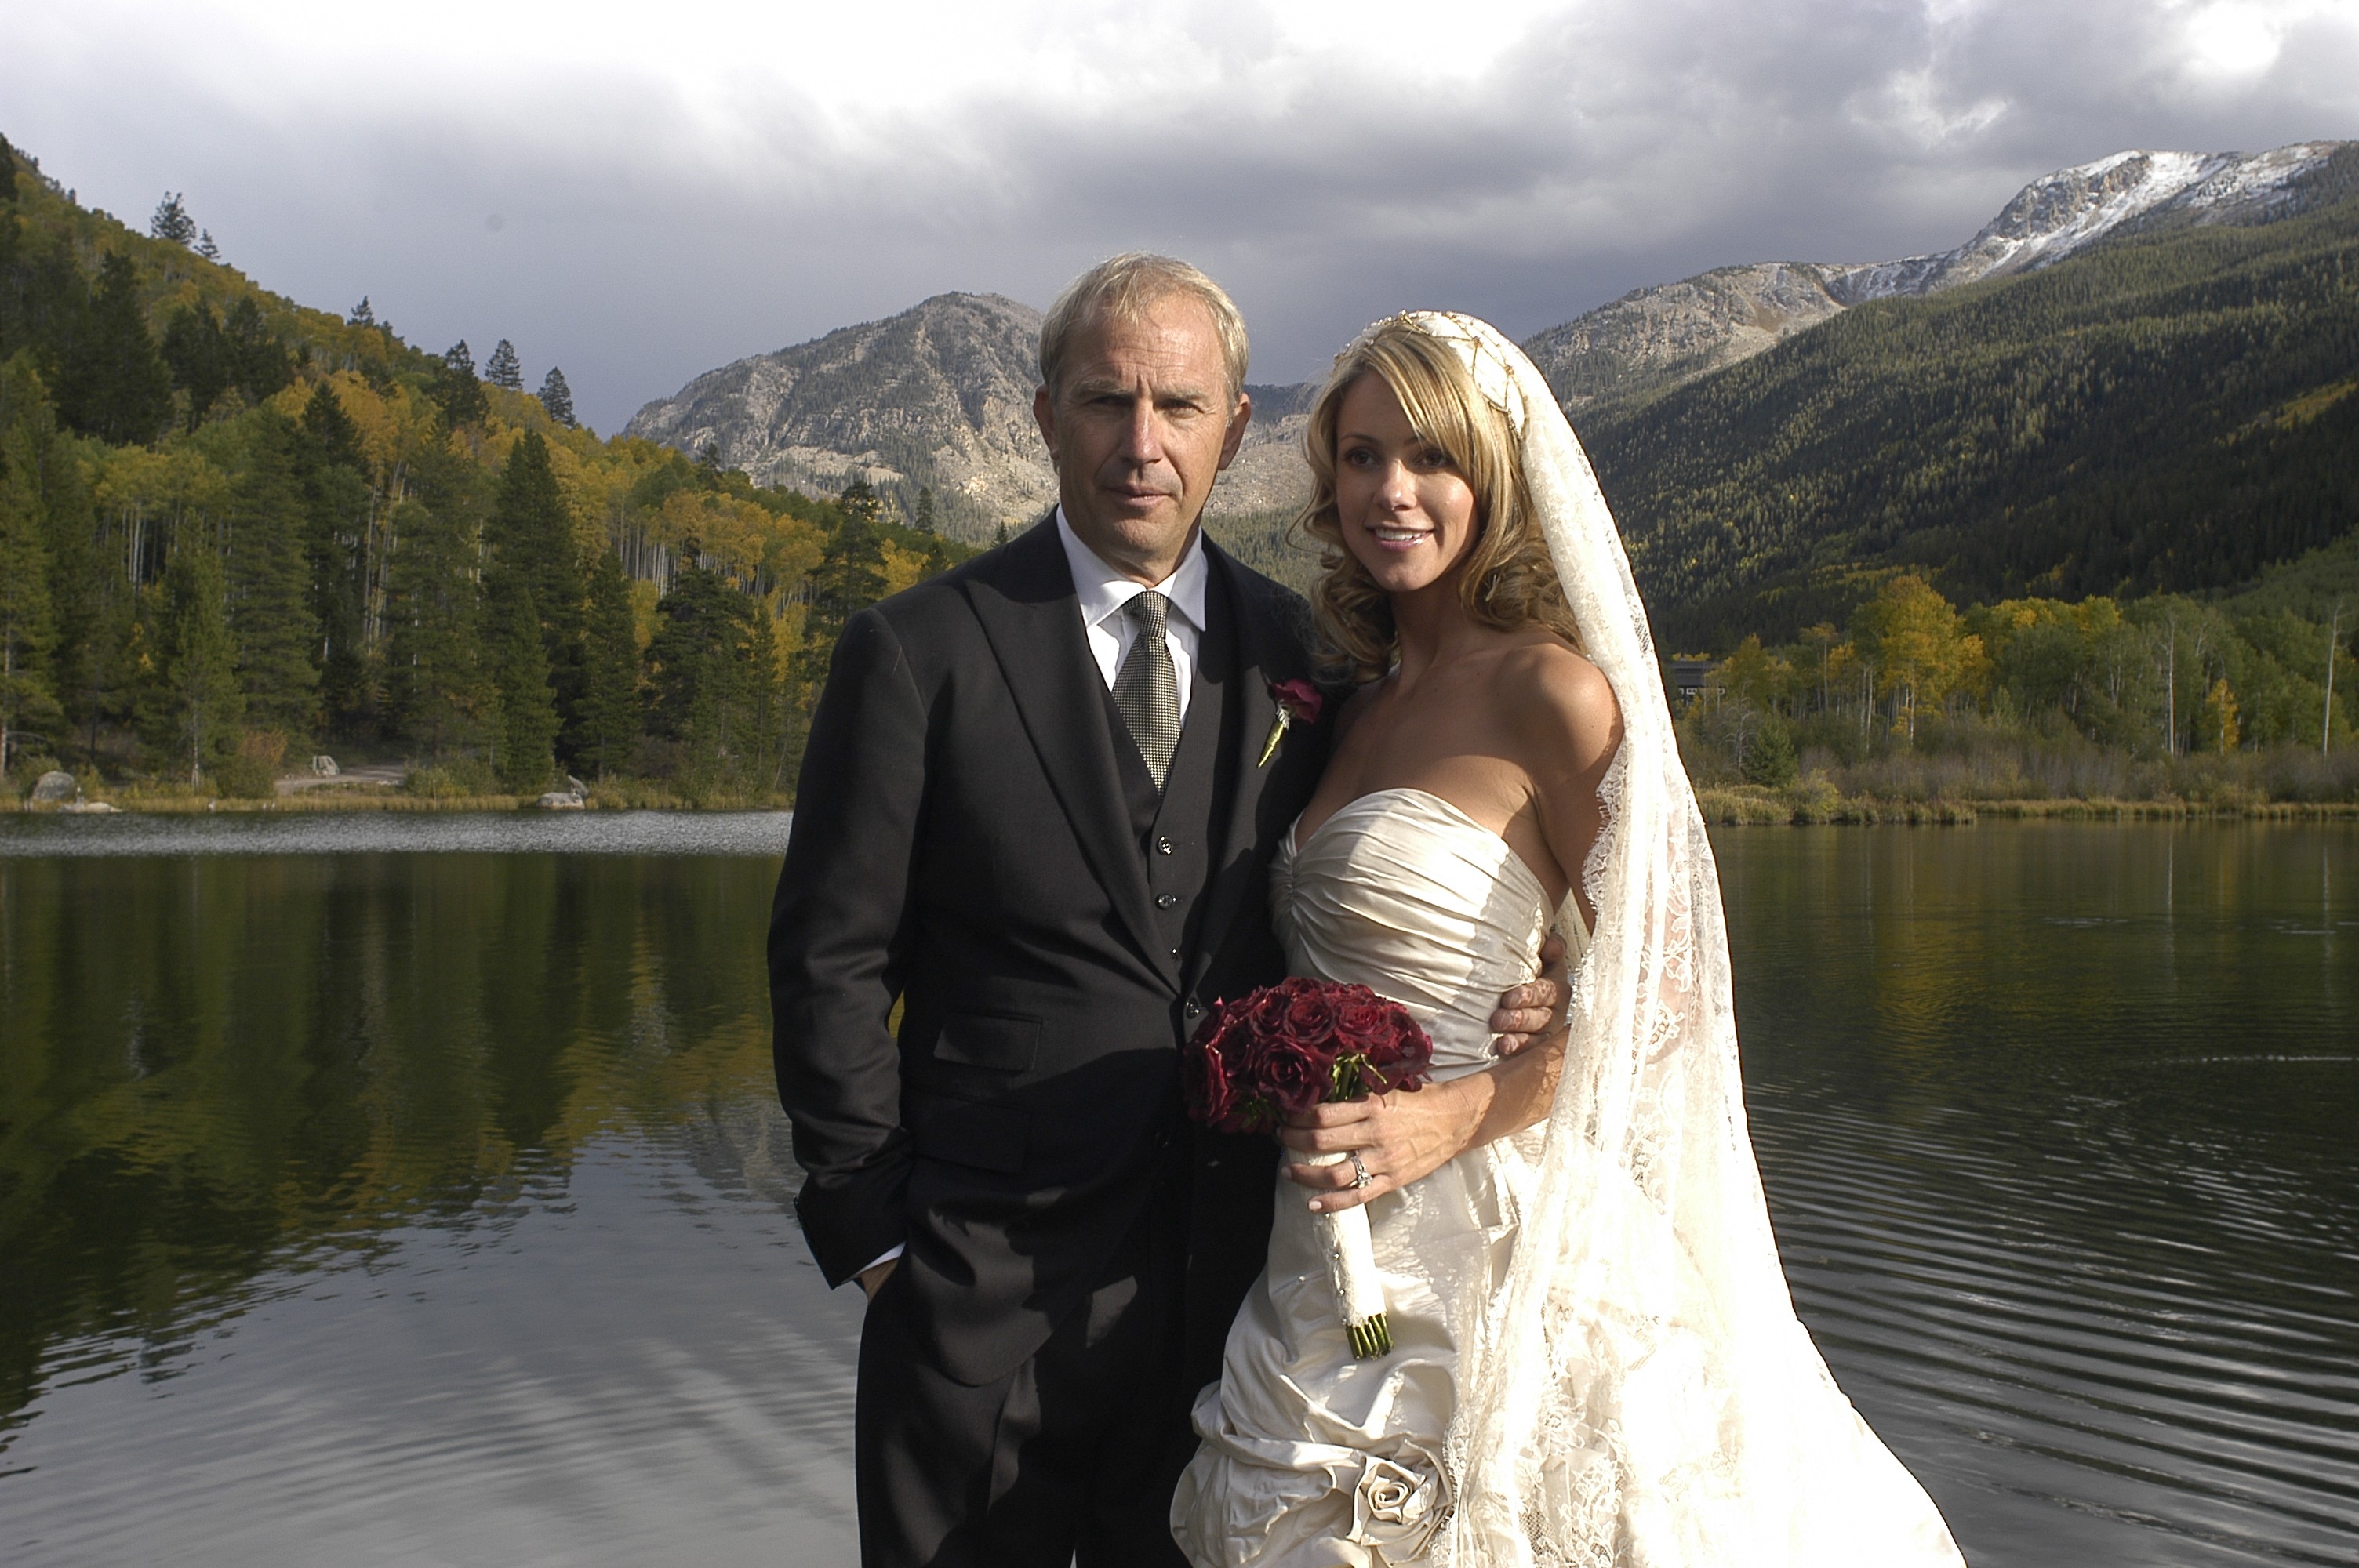 Kevin Costner poses with Christine Baumgartner during their private wedding at his ranch in September 25, 2004 in Aspen, Colorado. | Source: Getty Images